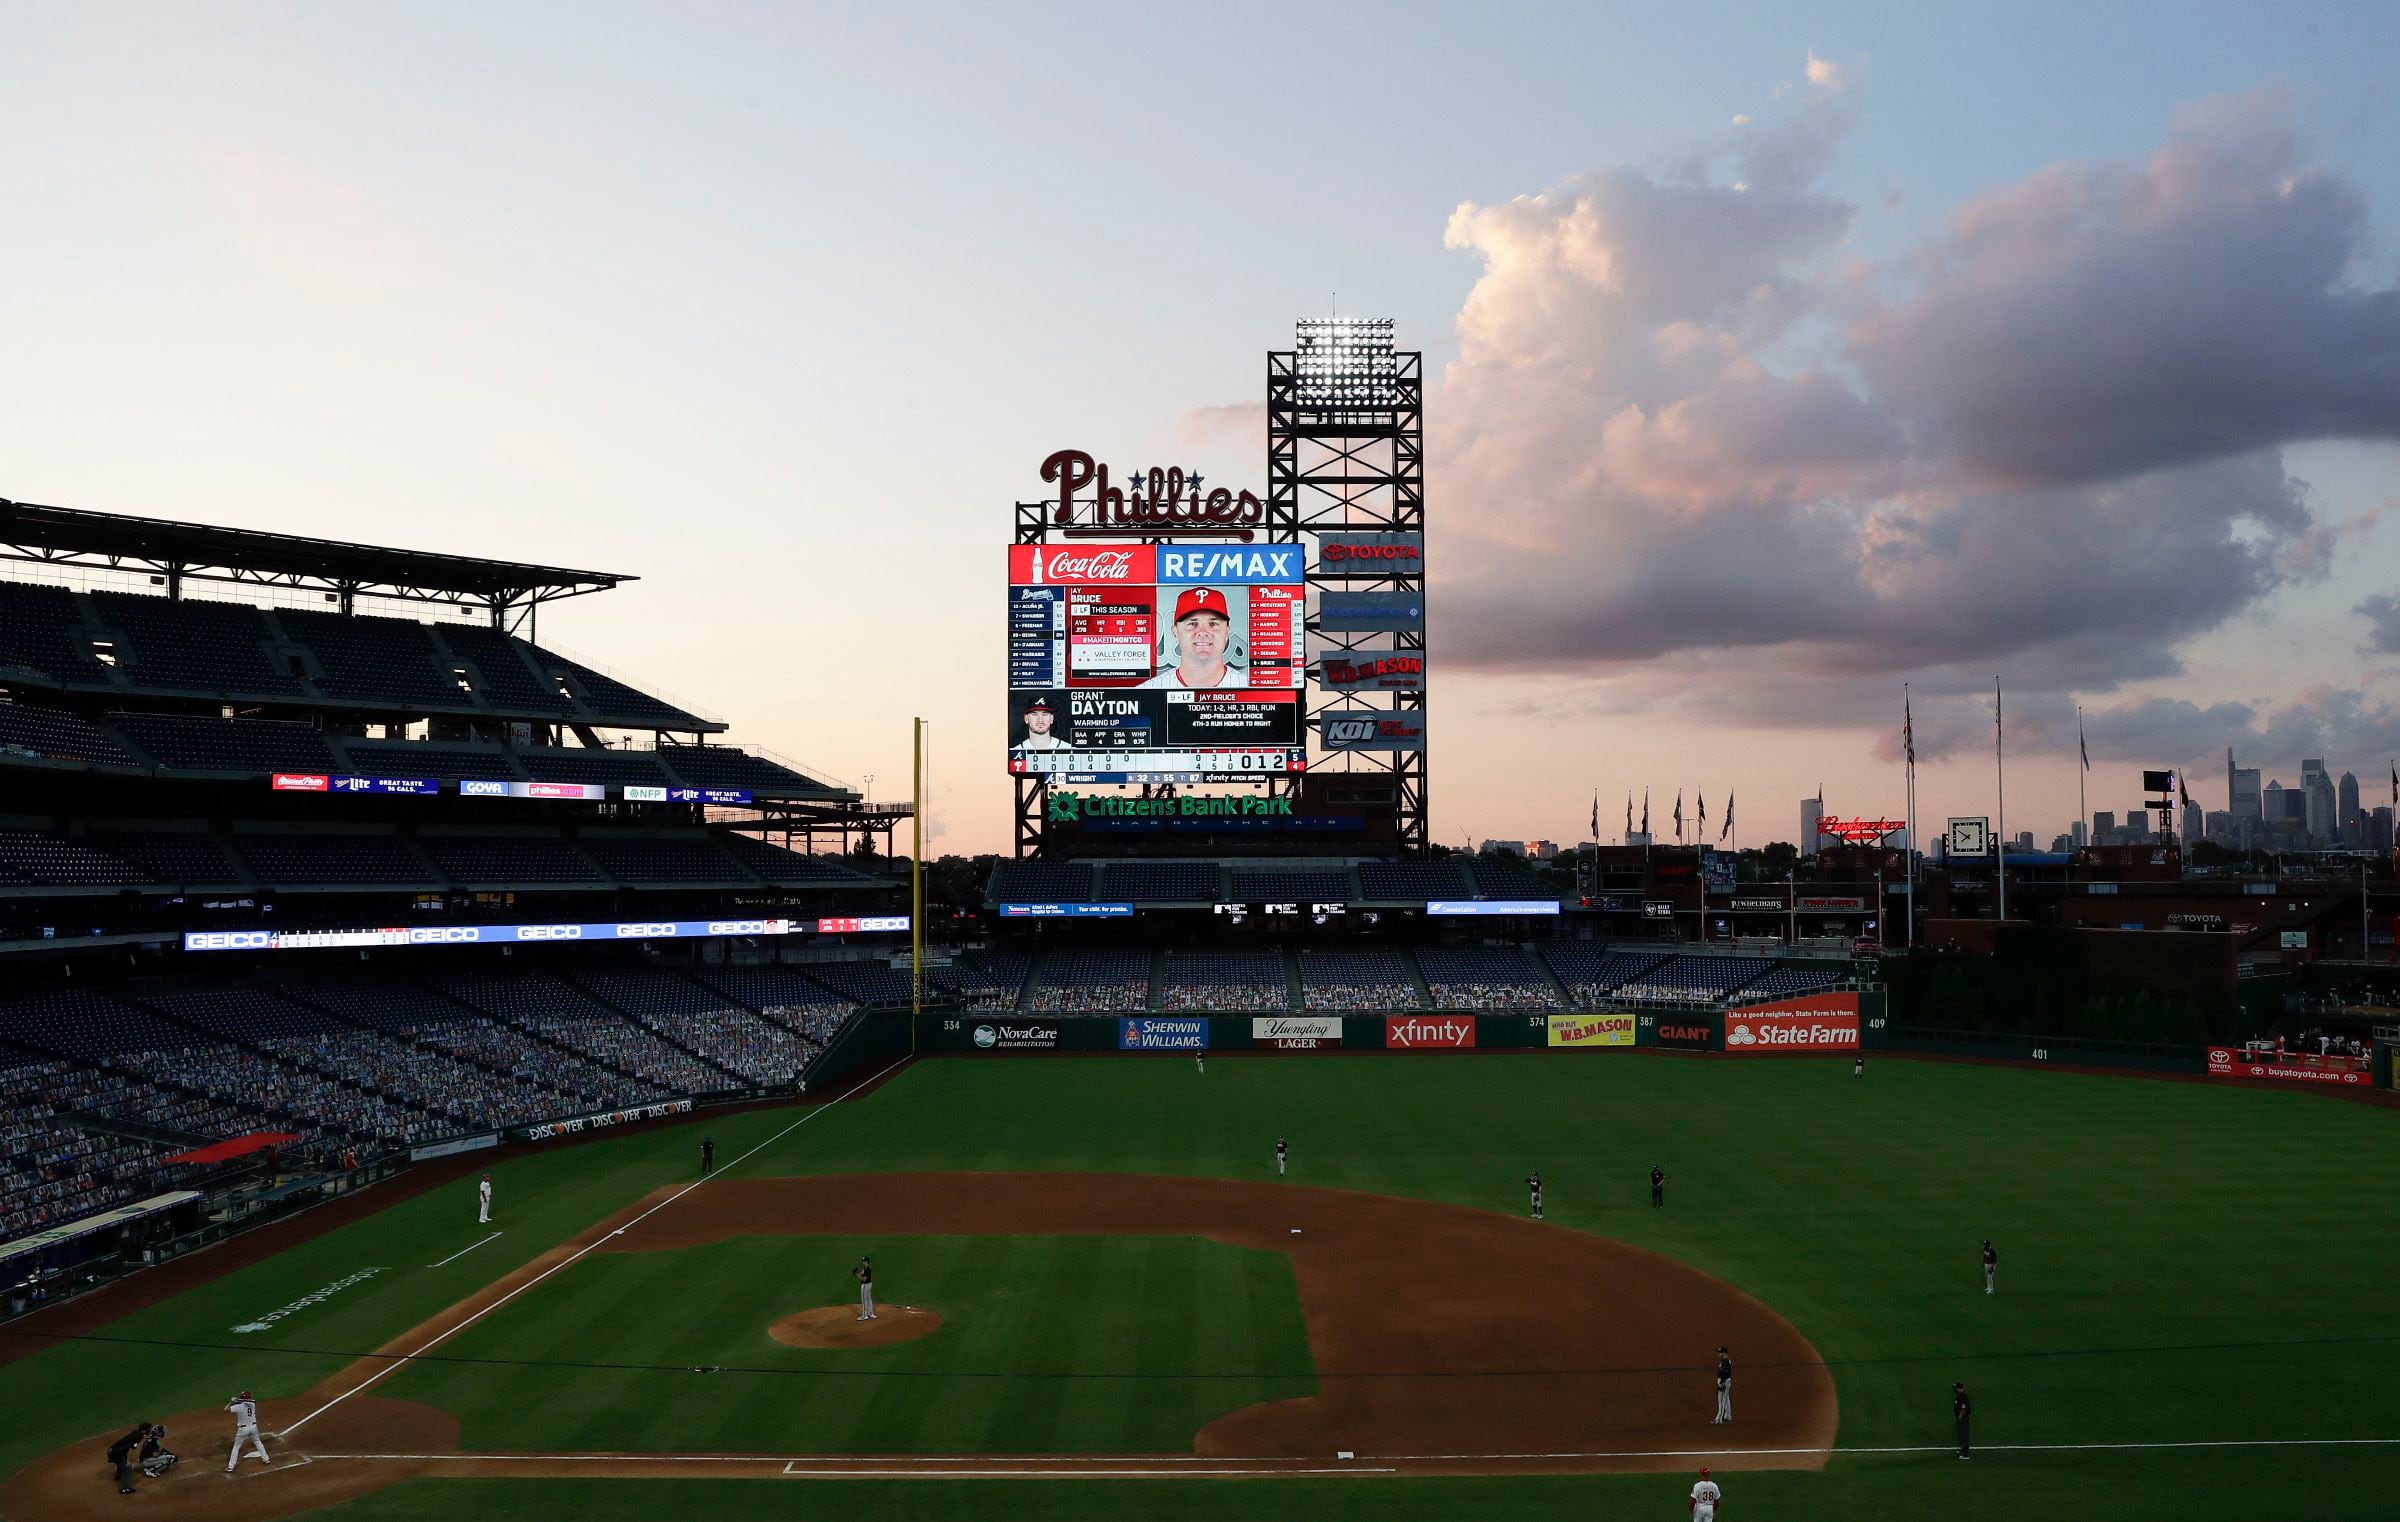 Phillies' female fans are among the most faithful – Delco Times